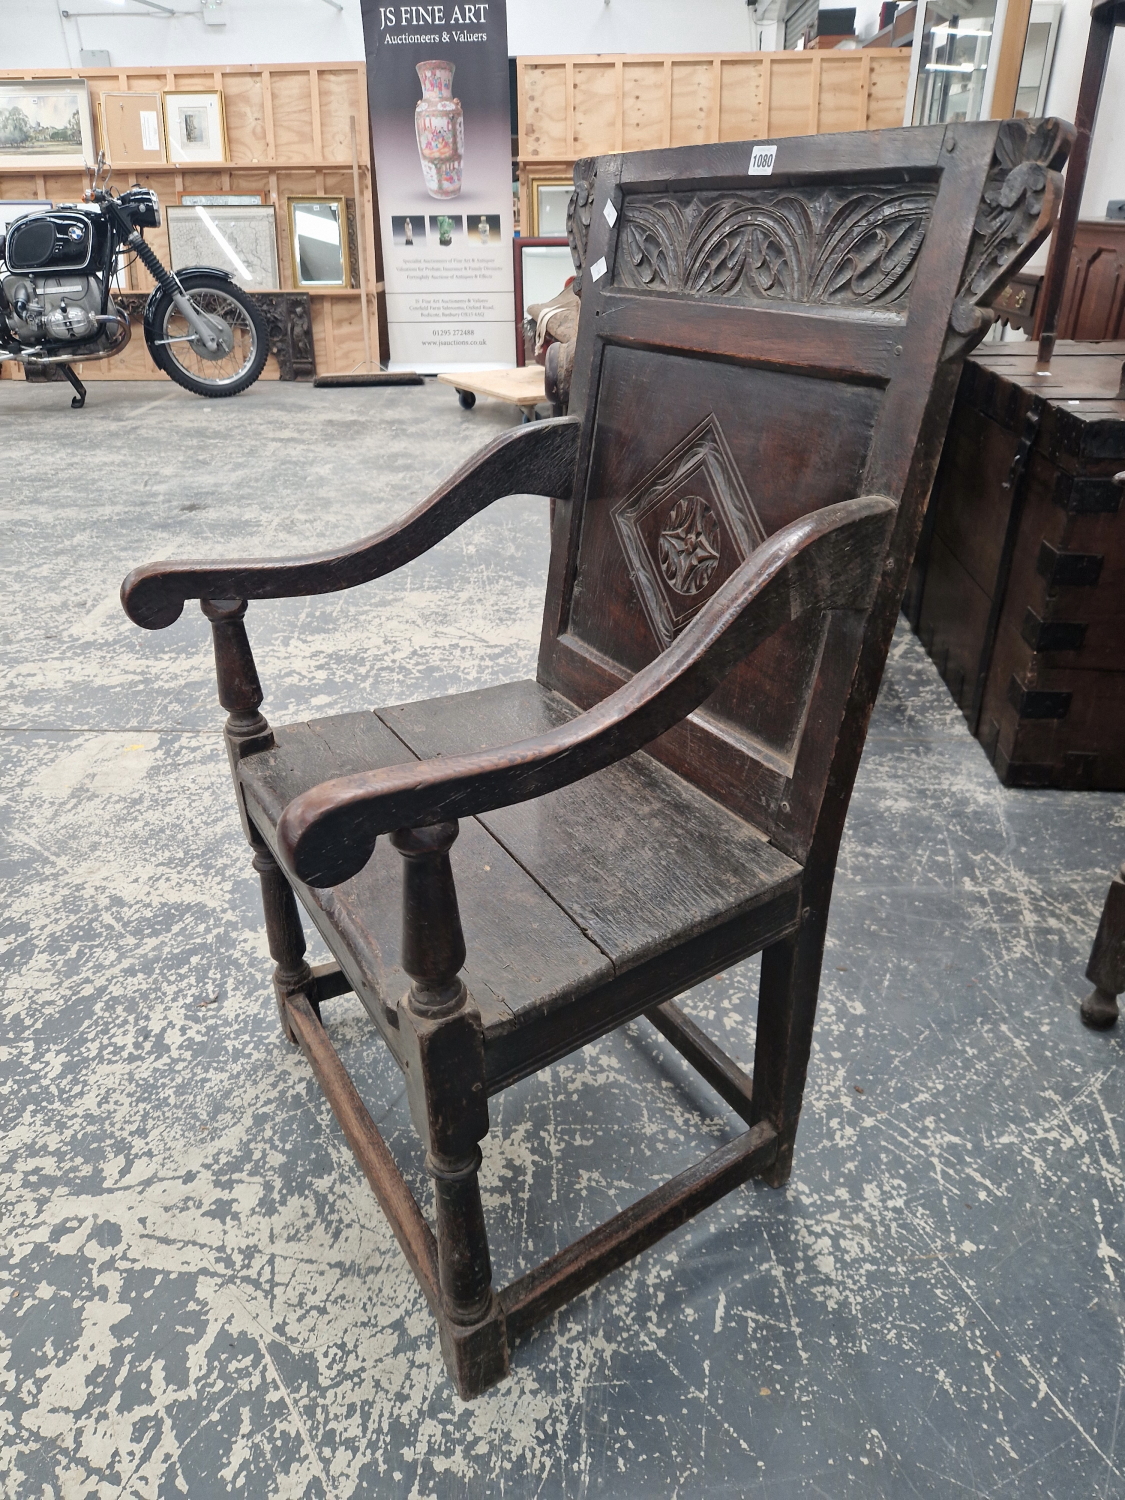 AN EARLY 18TH CENTURY WAINSCOTT CHAIR. - Image 6 of 6